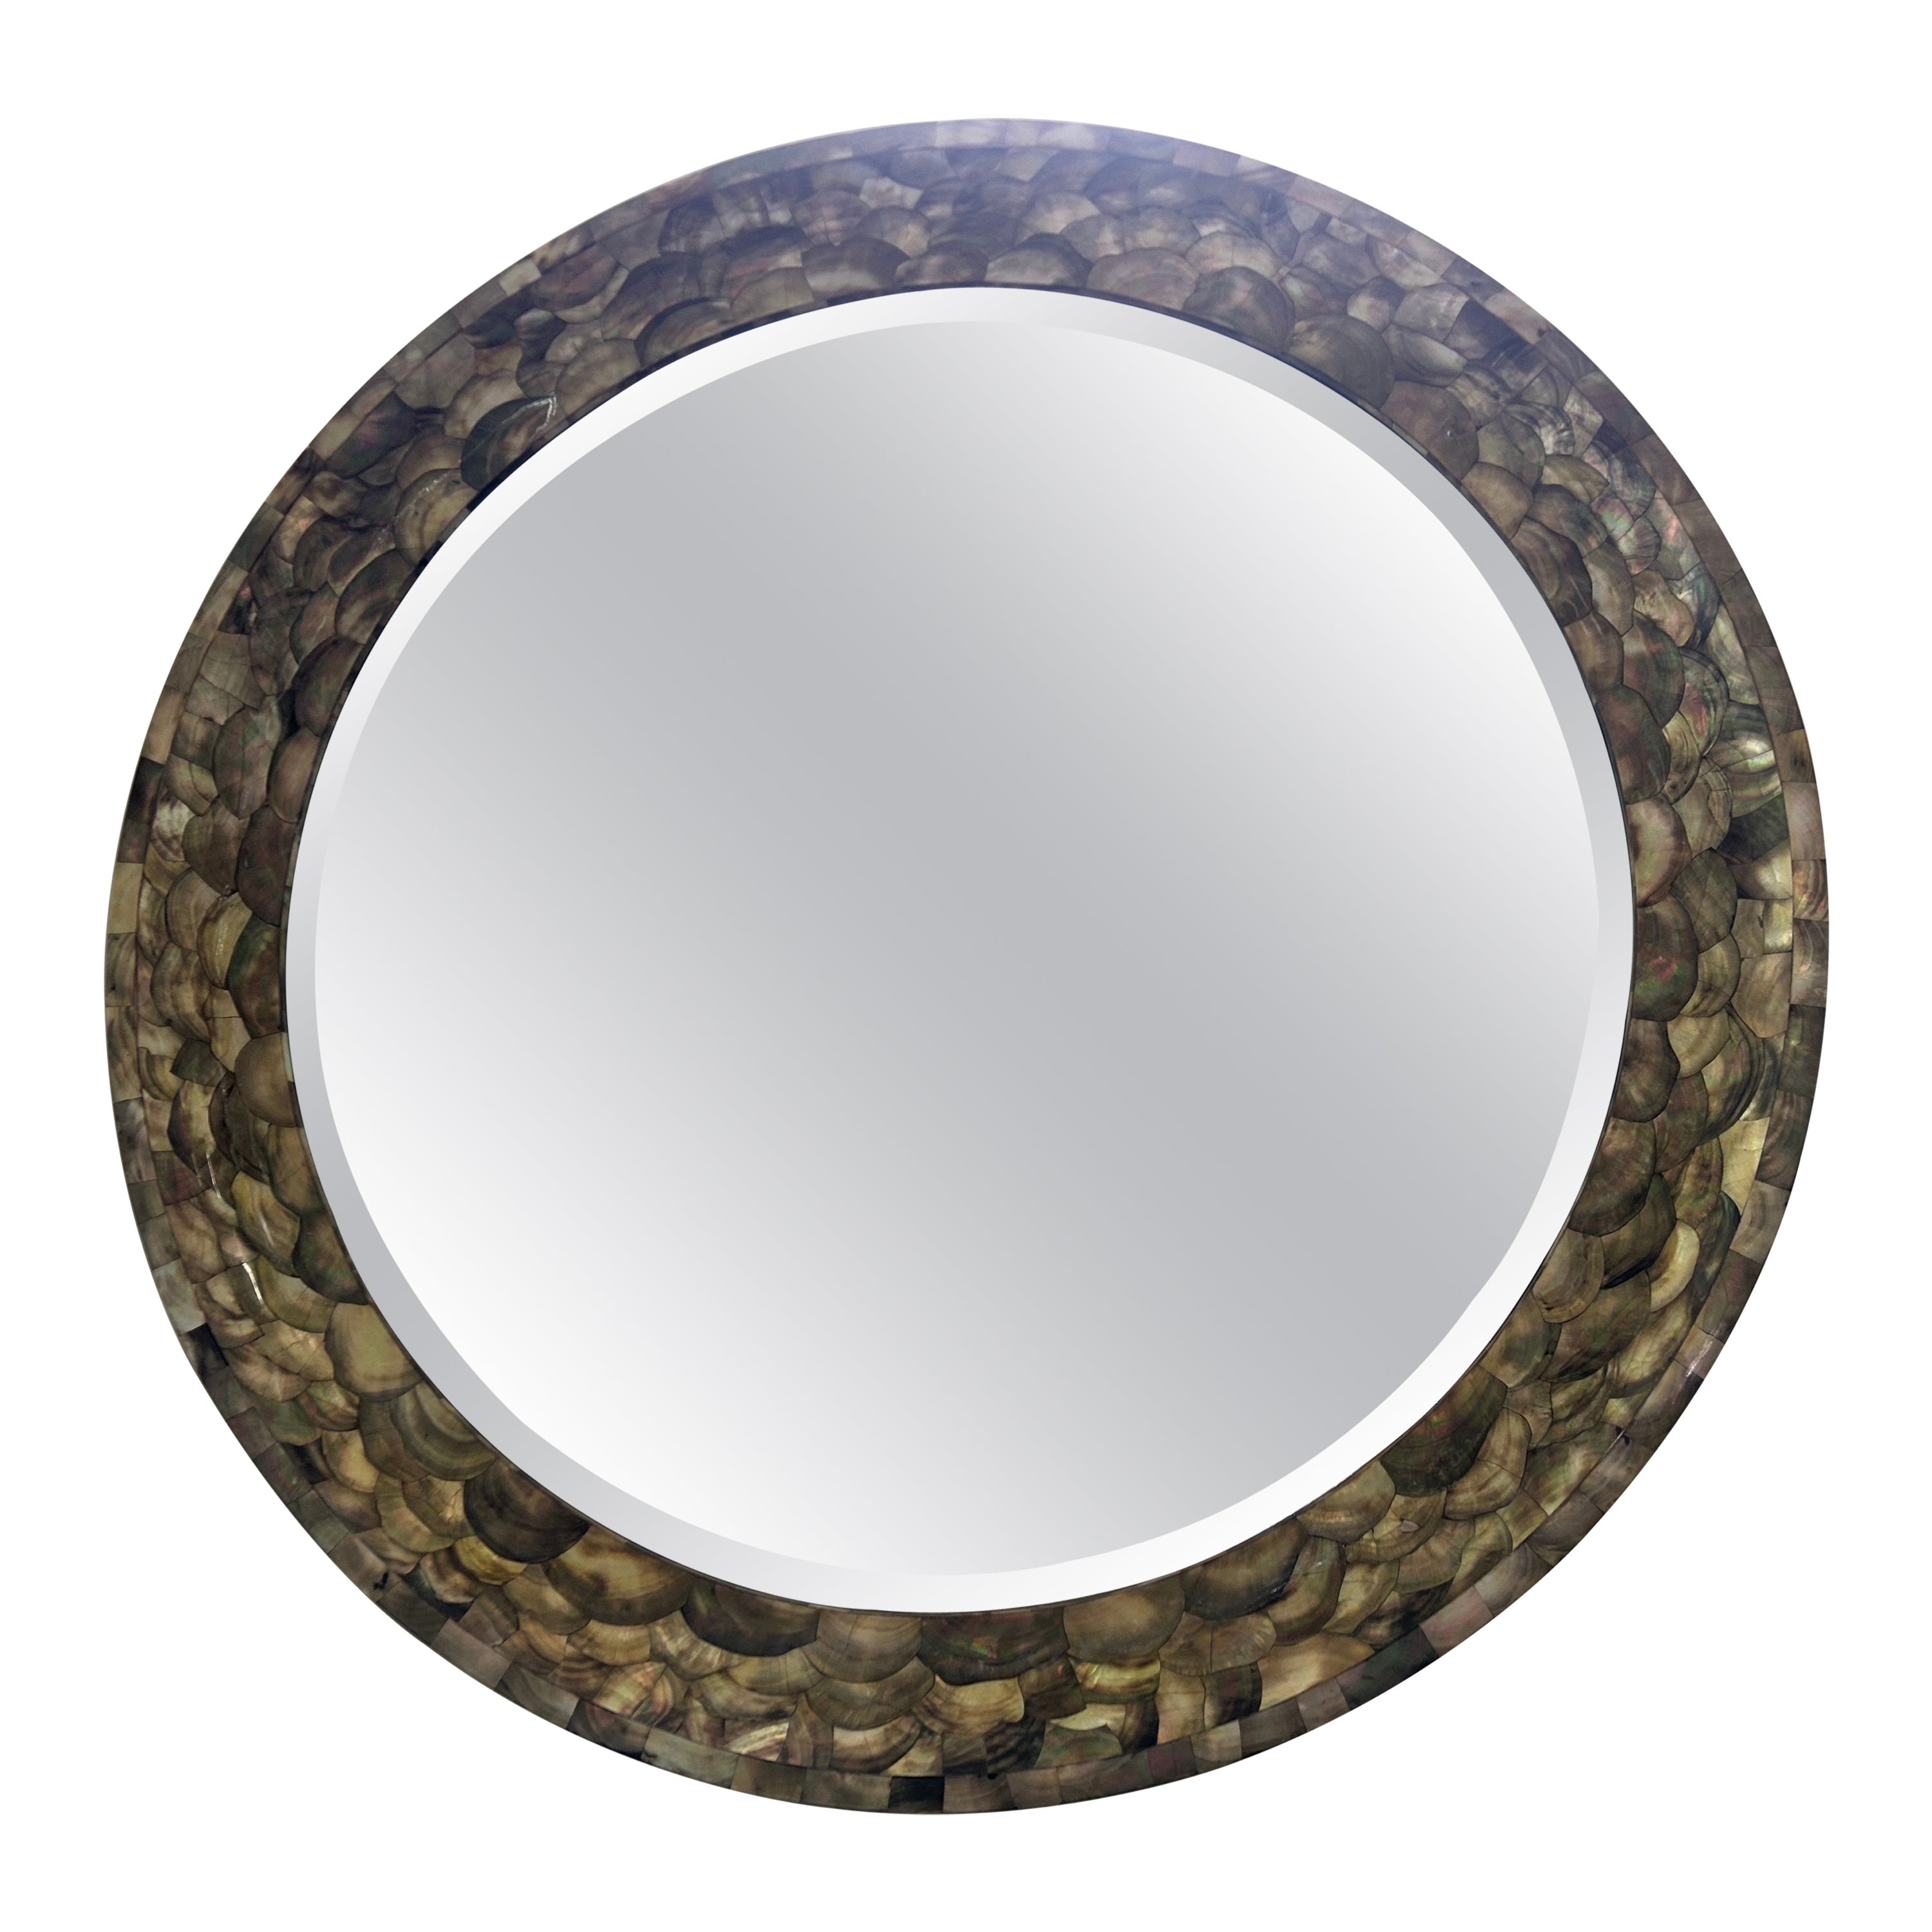 Vintage 47 Inch Round Abalone Beveled Mirror For Sale